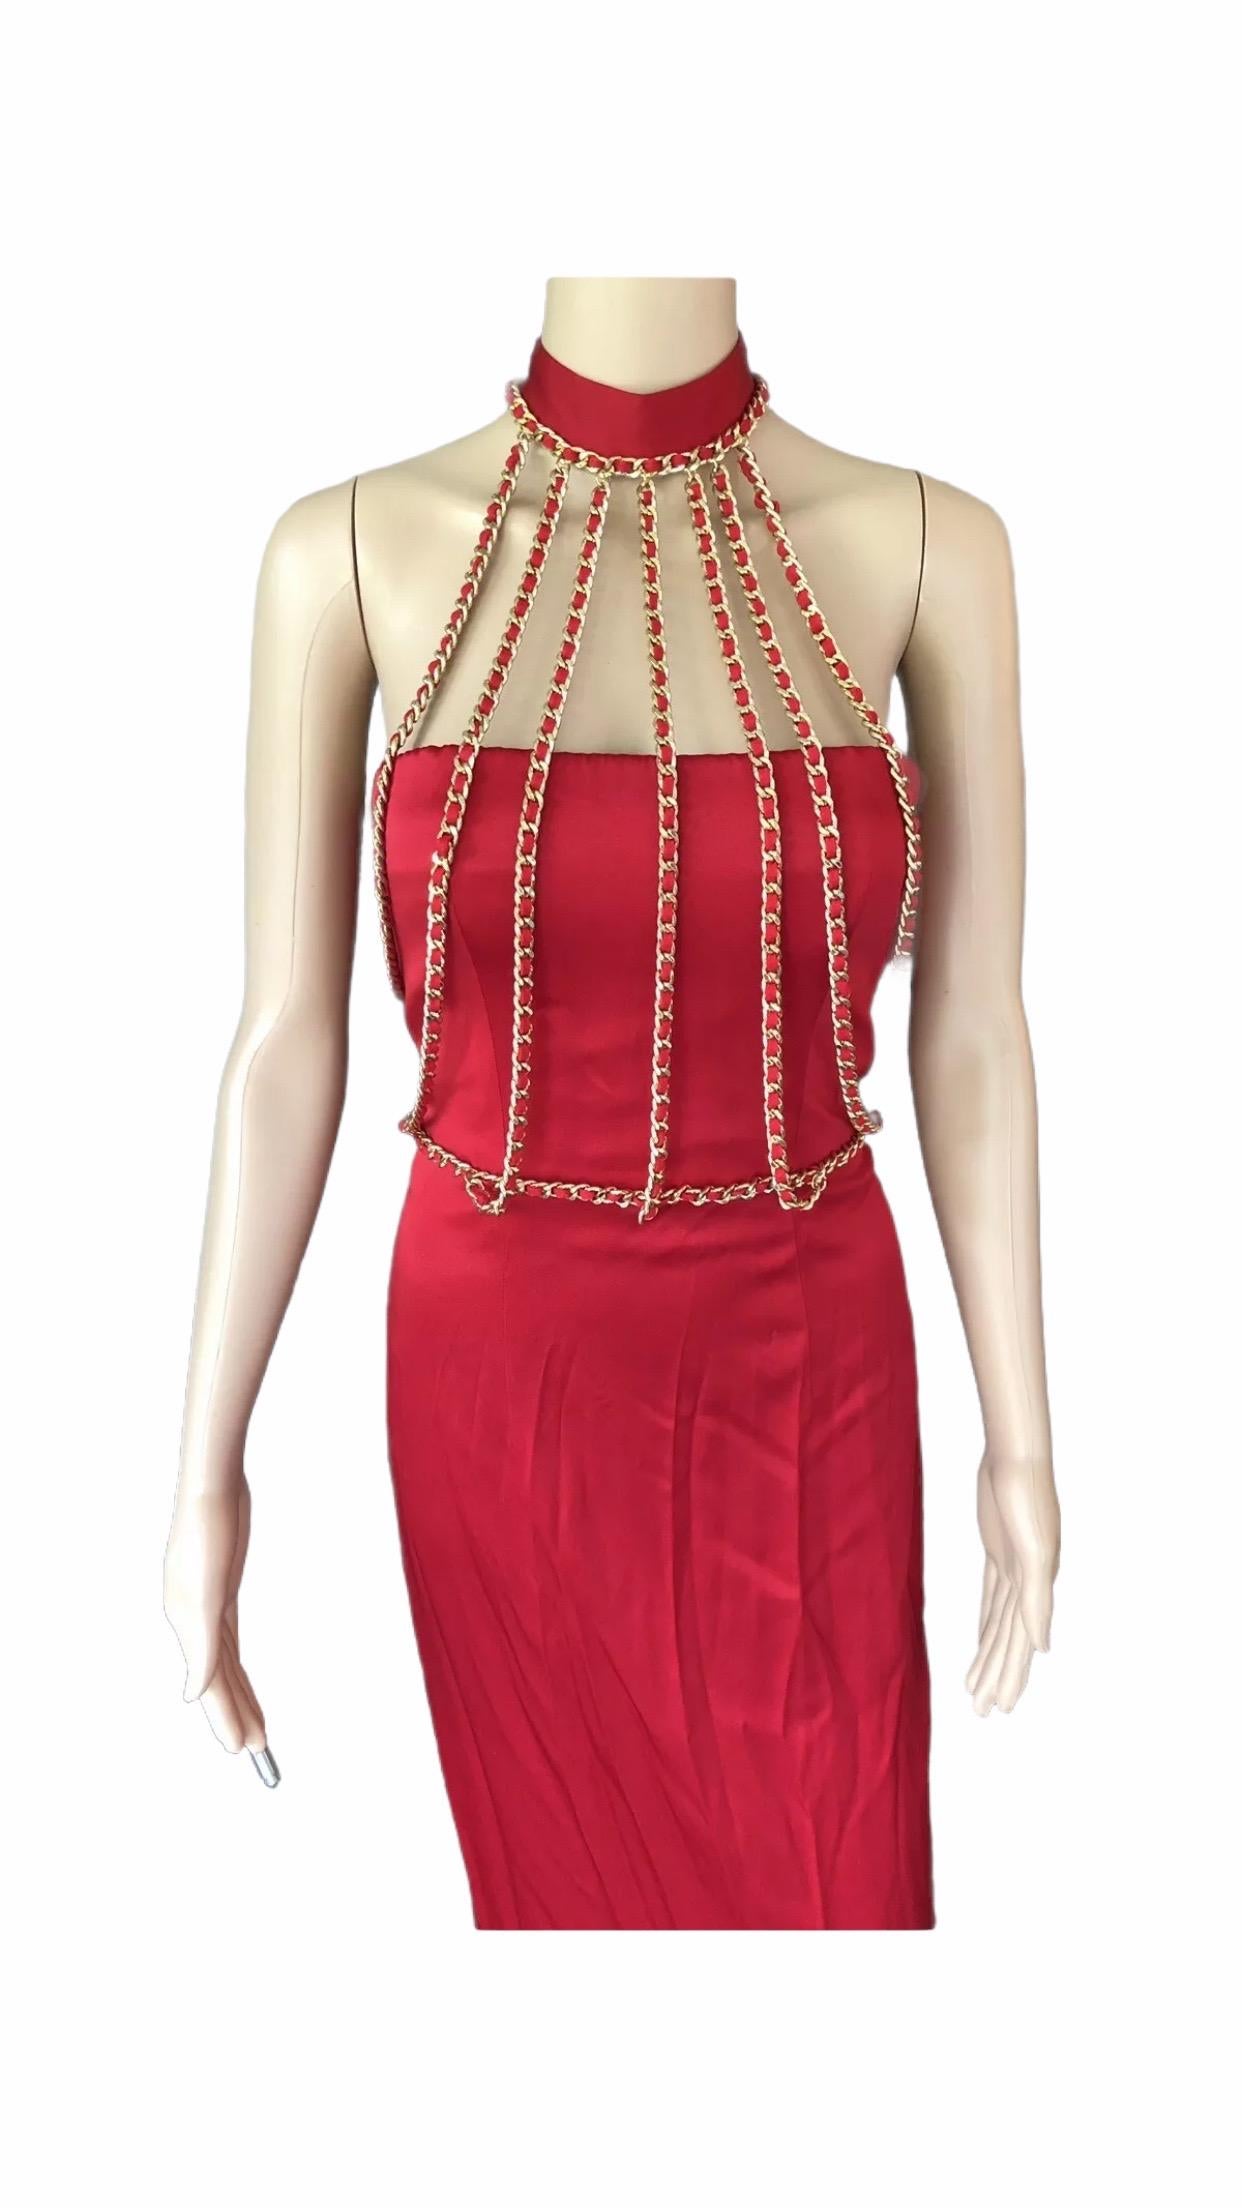 Moschino Couture Chain Harness Embellished Red Evening Dress Gown IT 40

Red Moschino Couture evening dress with chain-link accents throughout and concealed zip featuring hook-and-eye closure at back.

